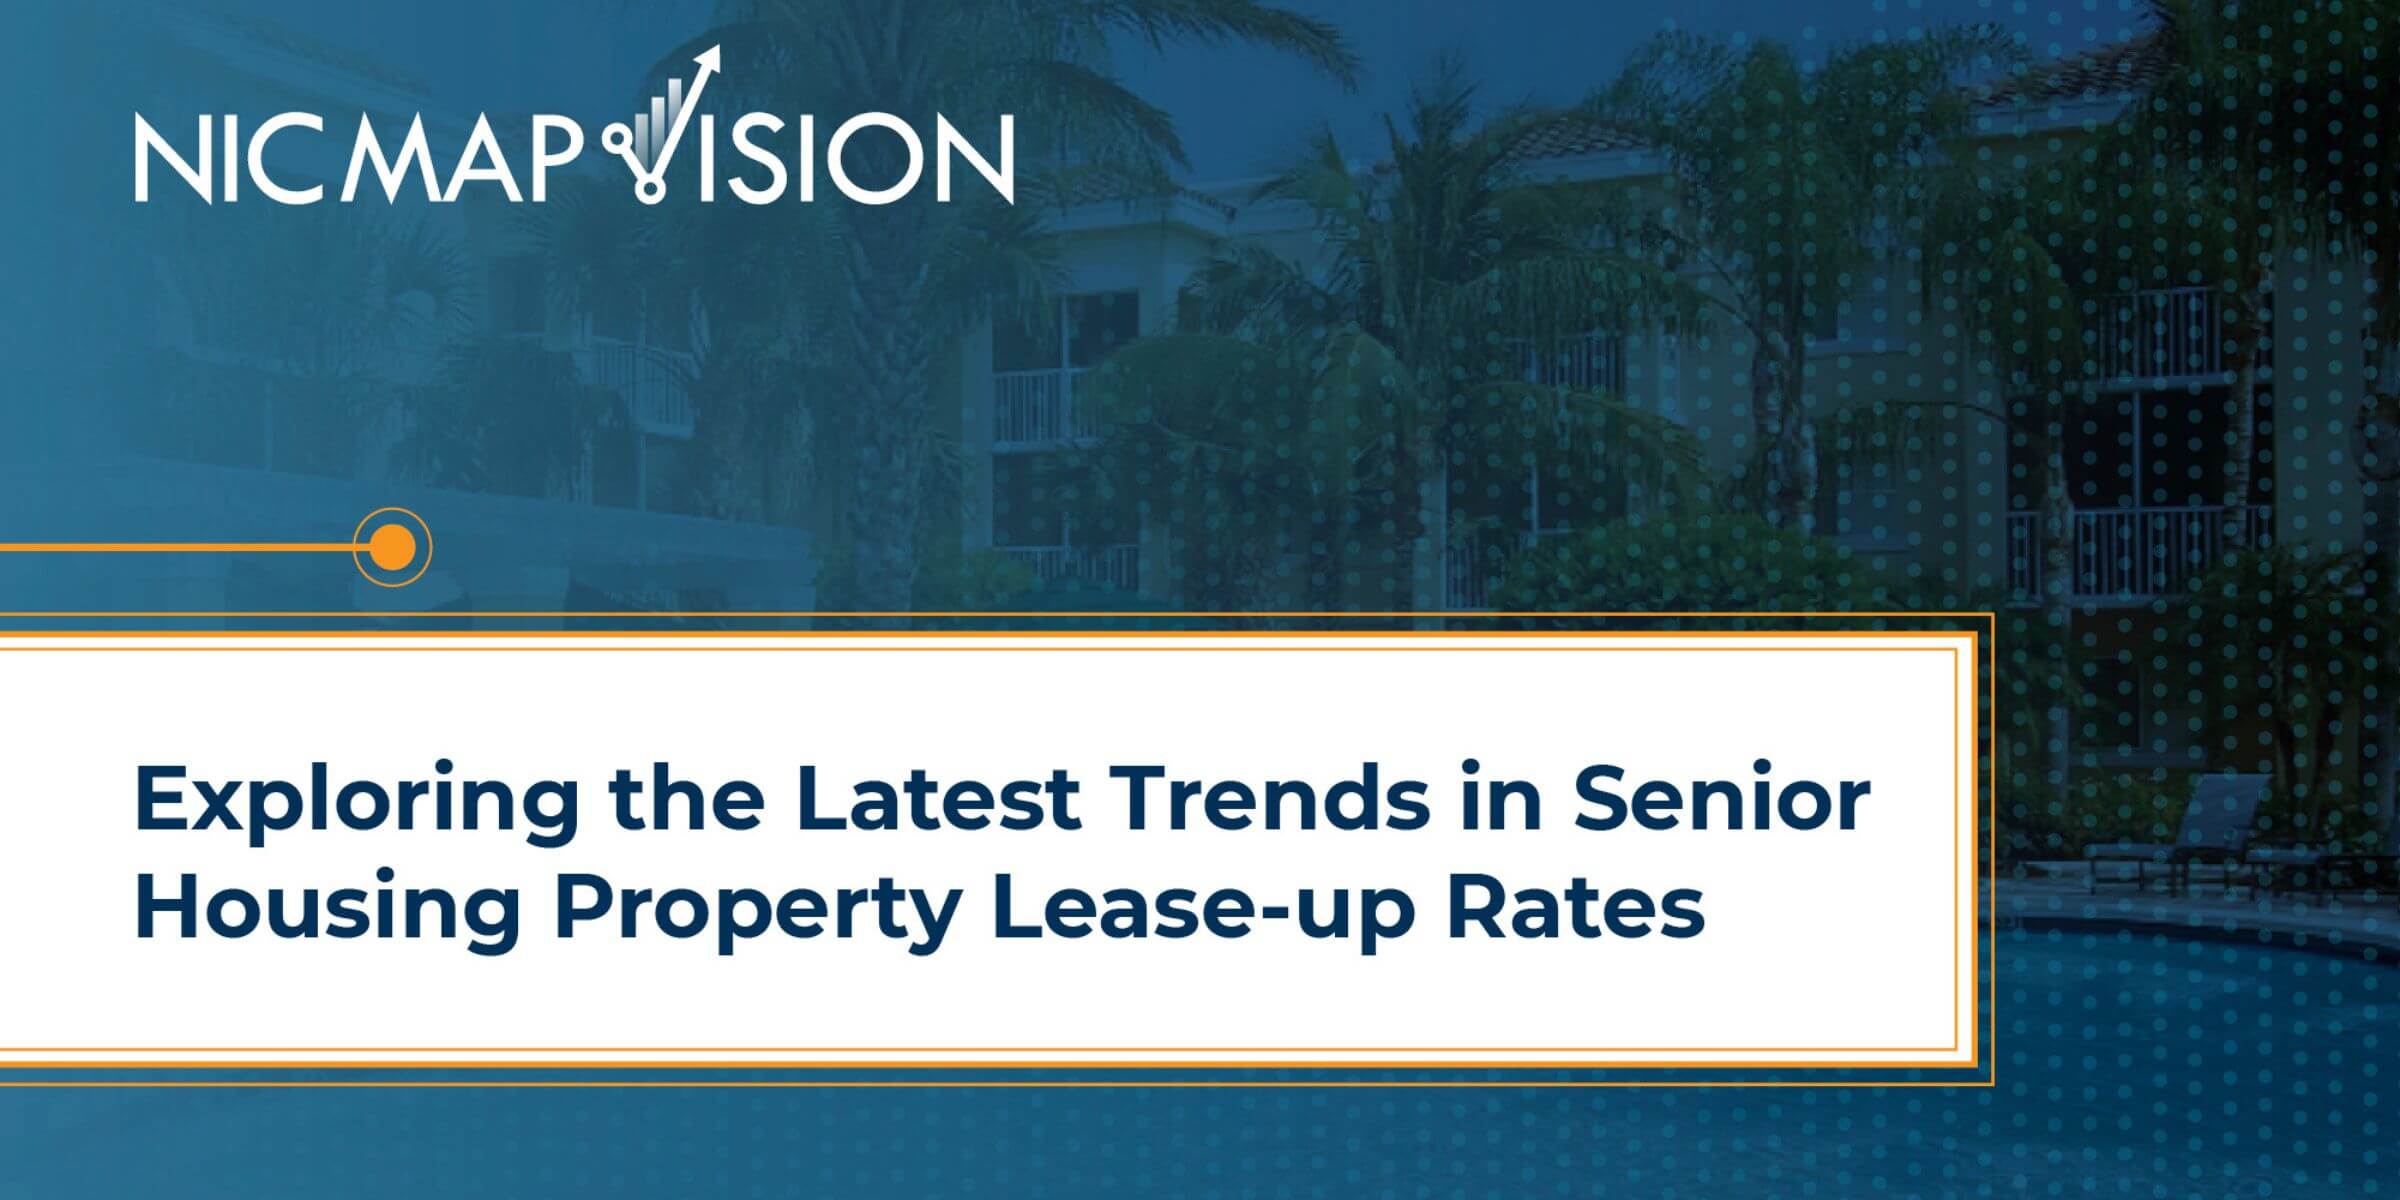 Exploring the Latest Trends in Senior Housing Property Lease-up Rates